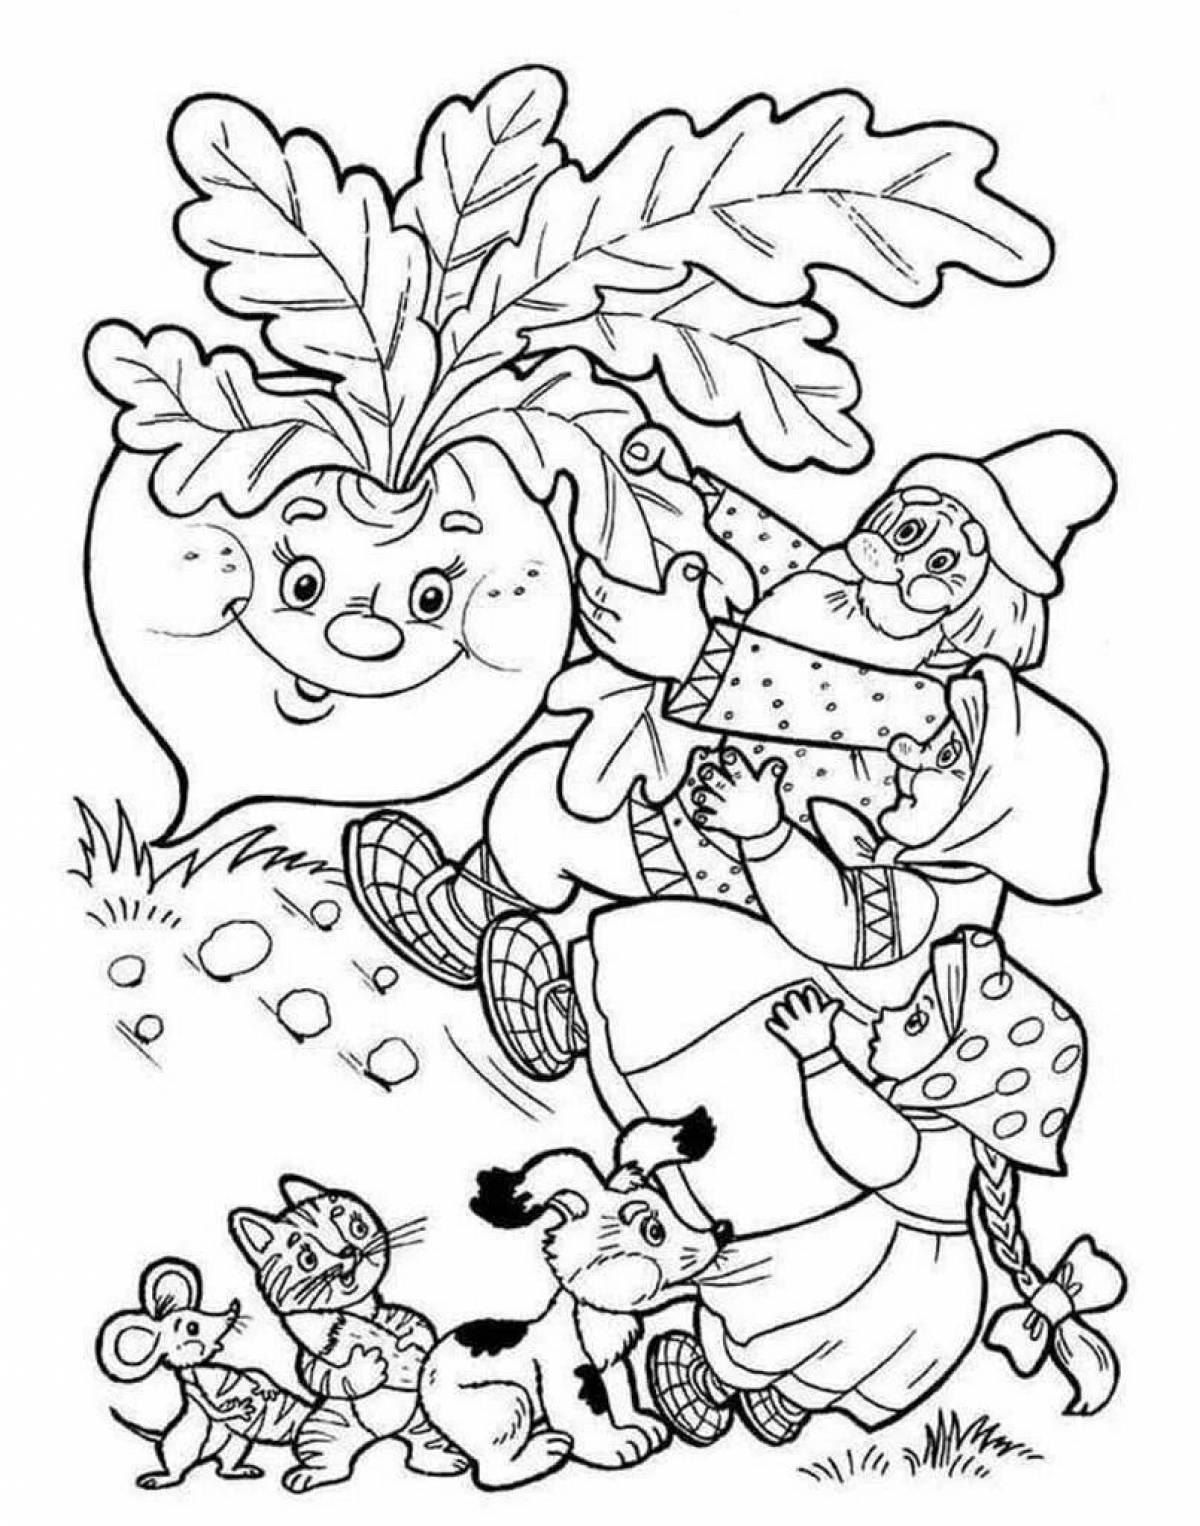 Beautiful turnip coloring page for the little ones